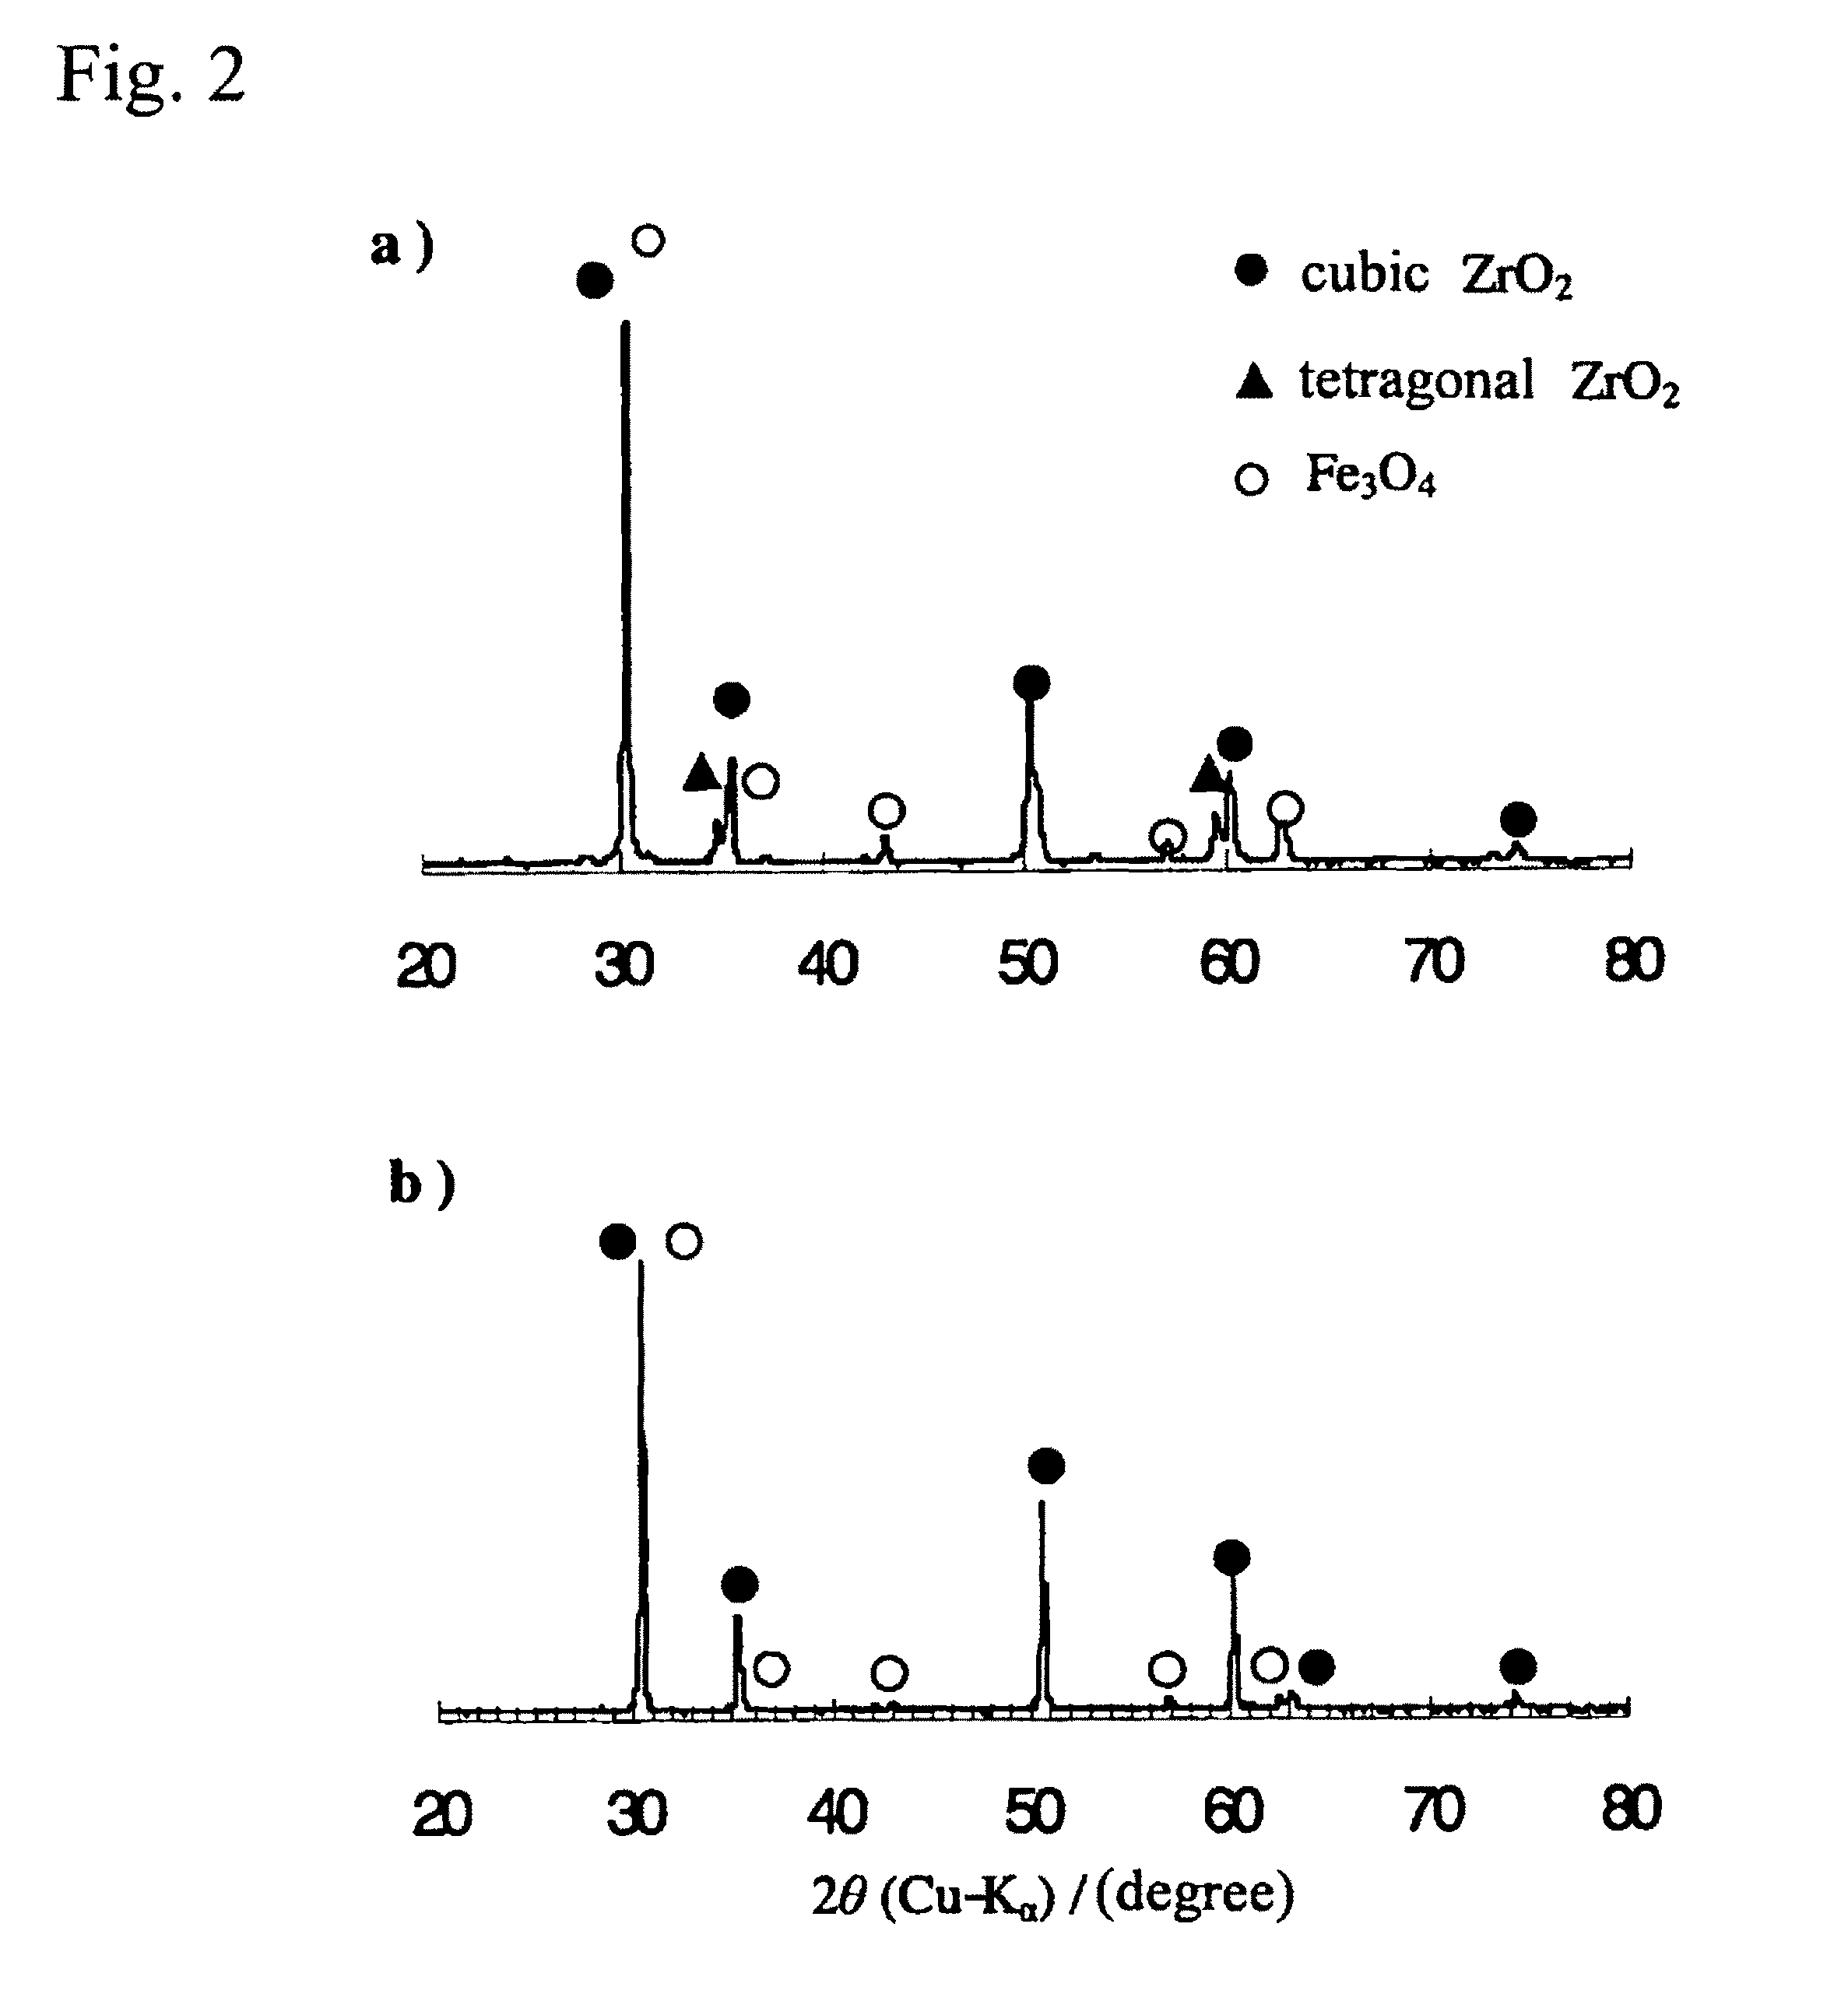 Reactive working material for use in hydrogen production by decomposition of water